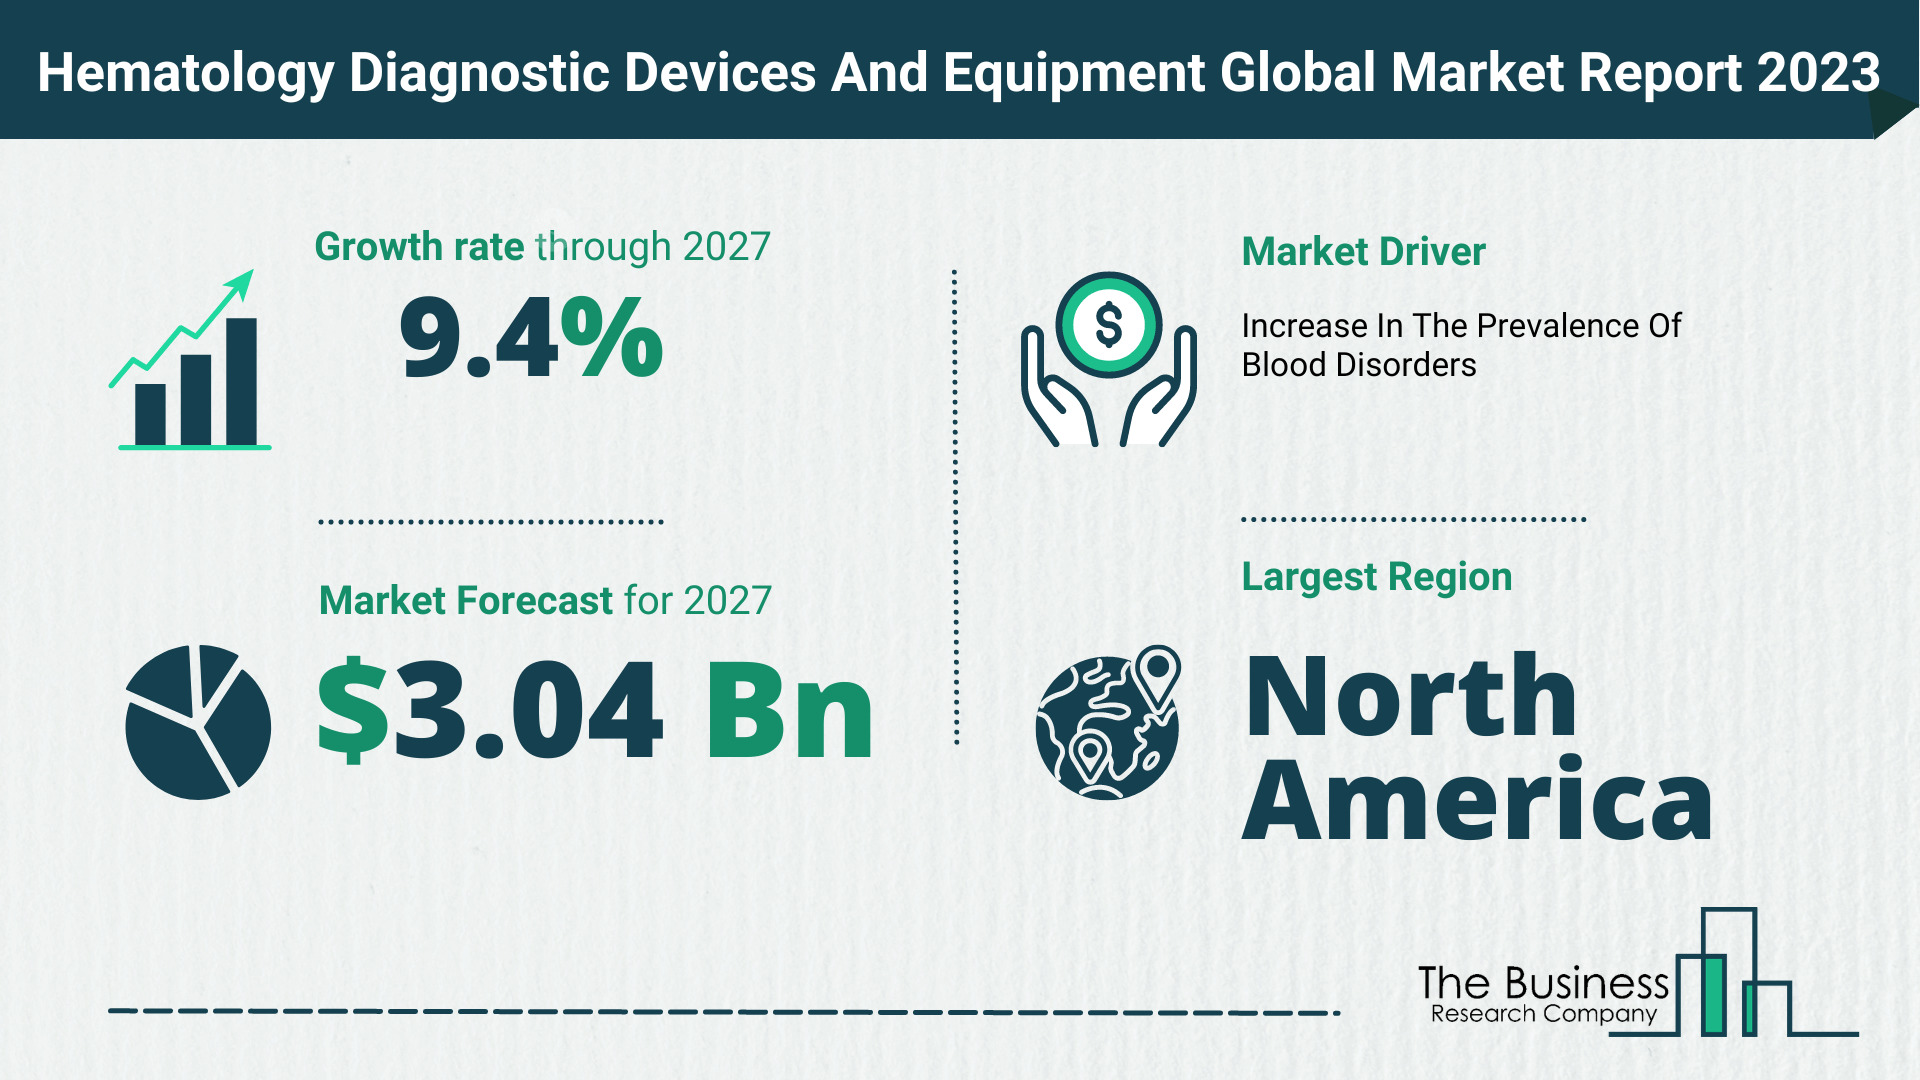 How Will The Hematology Diagnostic Devices And Equipment Market Globally Expand In 2023?